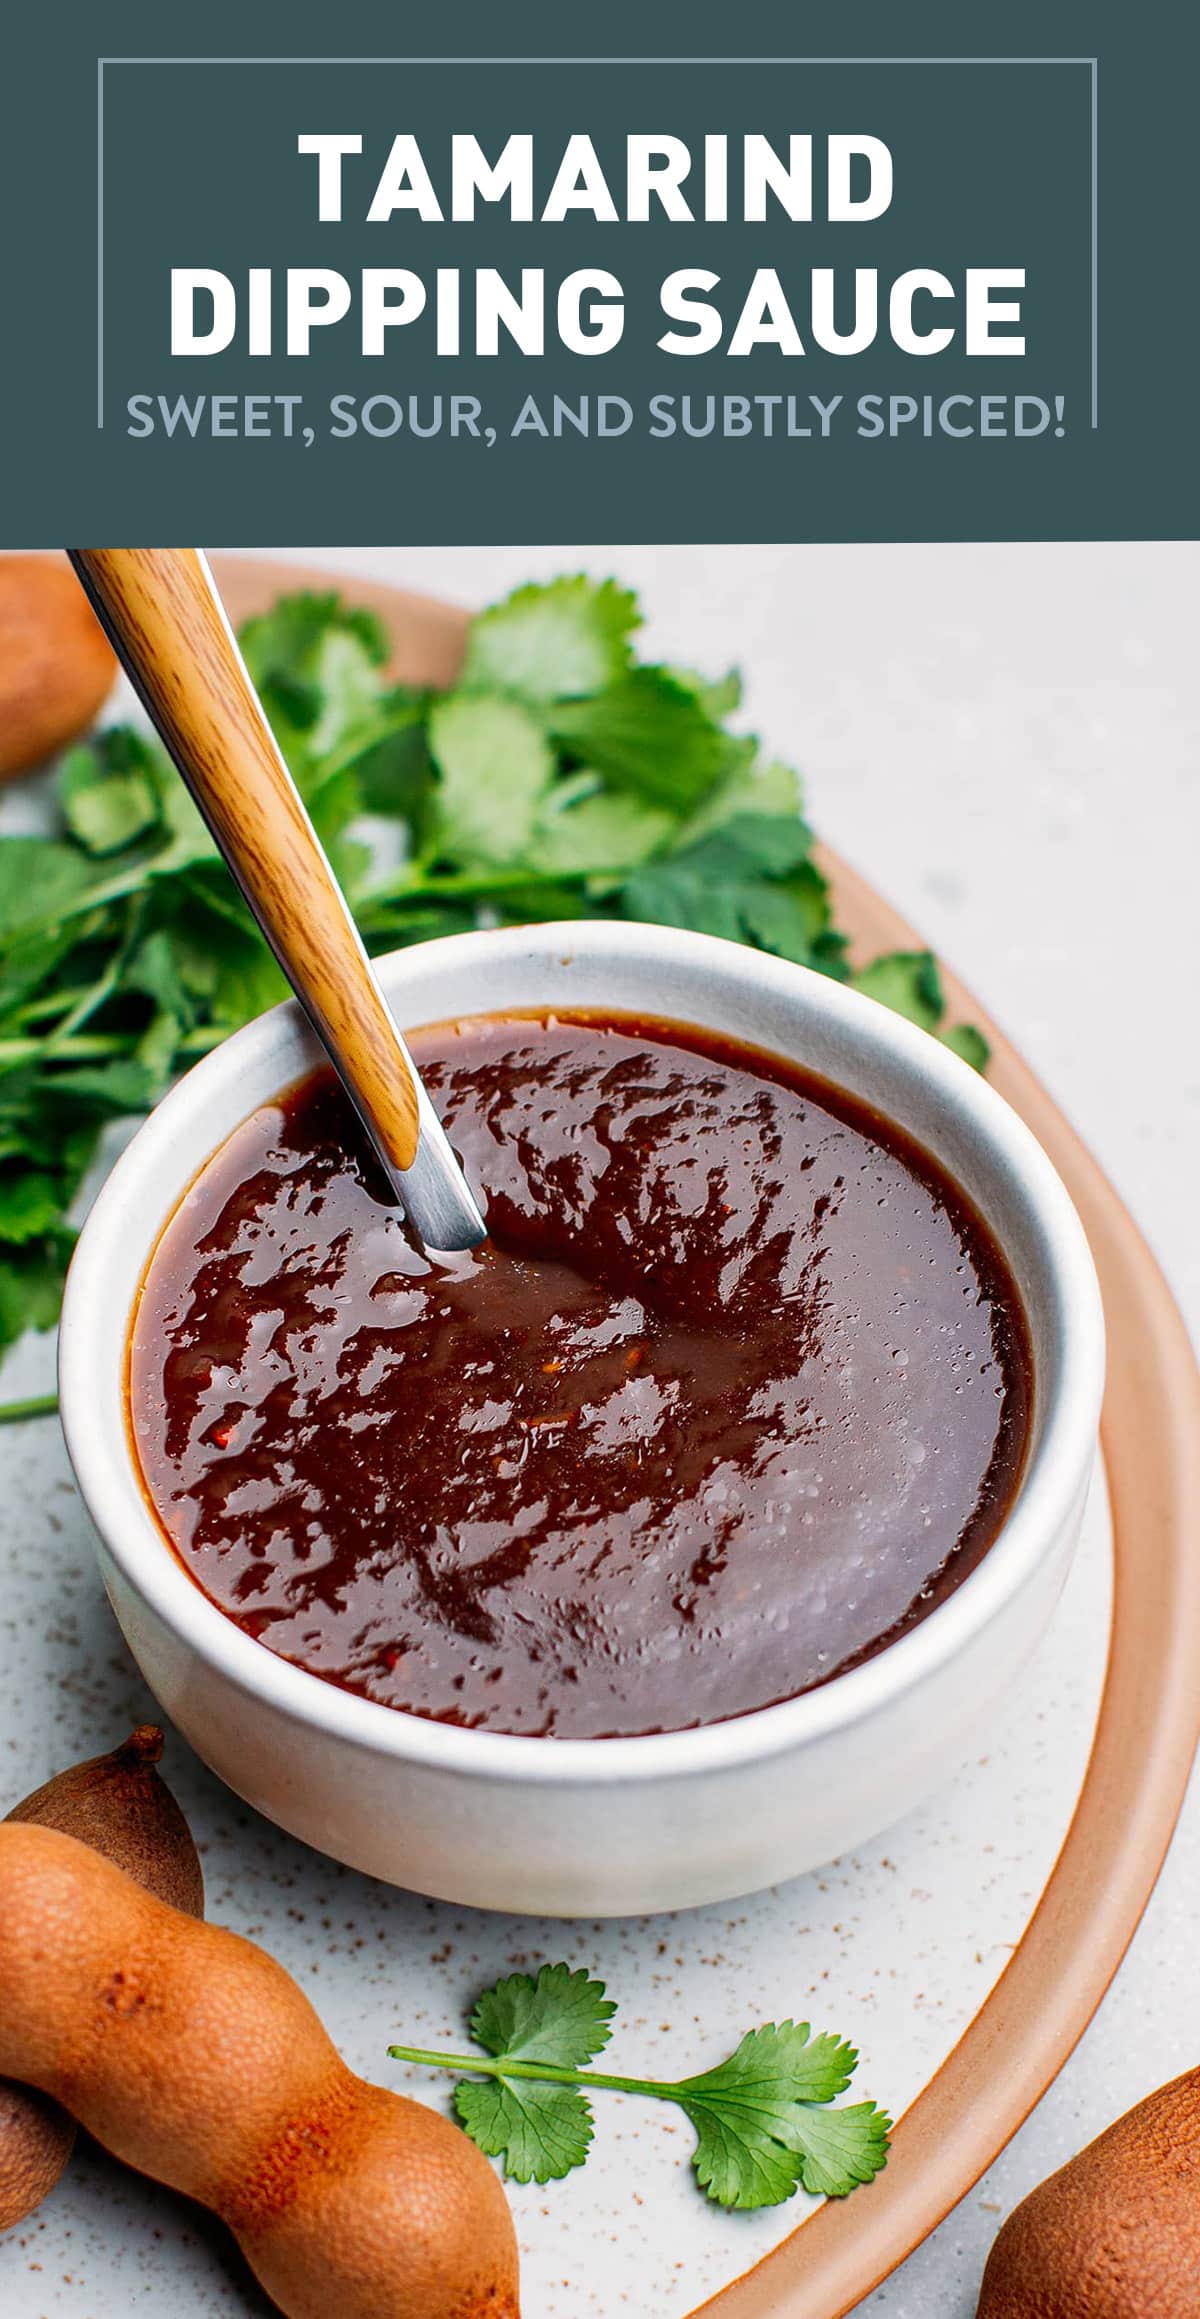 This tamarind dipping sauce is sweet, sour, and subtly infused with Indian spices such as cumin seeds, ginger, chili, and garam masala. It's the ultimate dipping sauce for samosas, pakora, egg rolls, or fries! #tamarind #indianfood